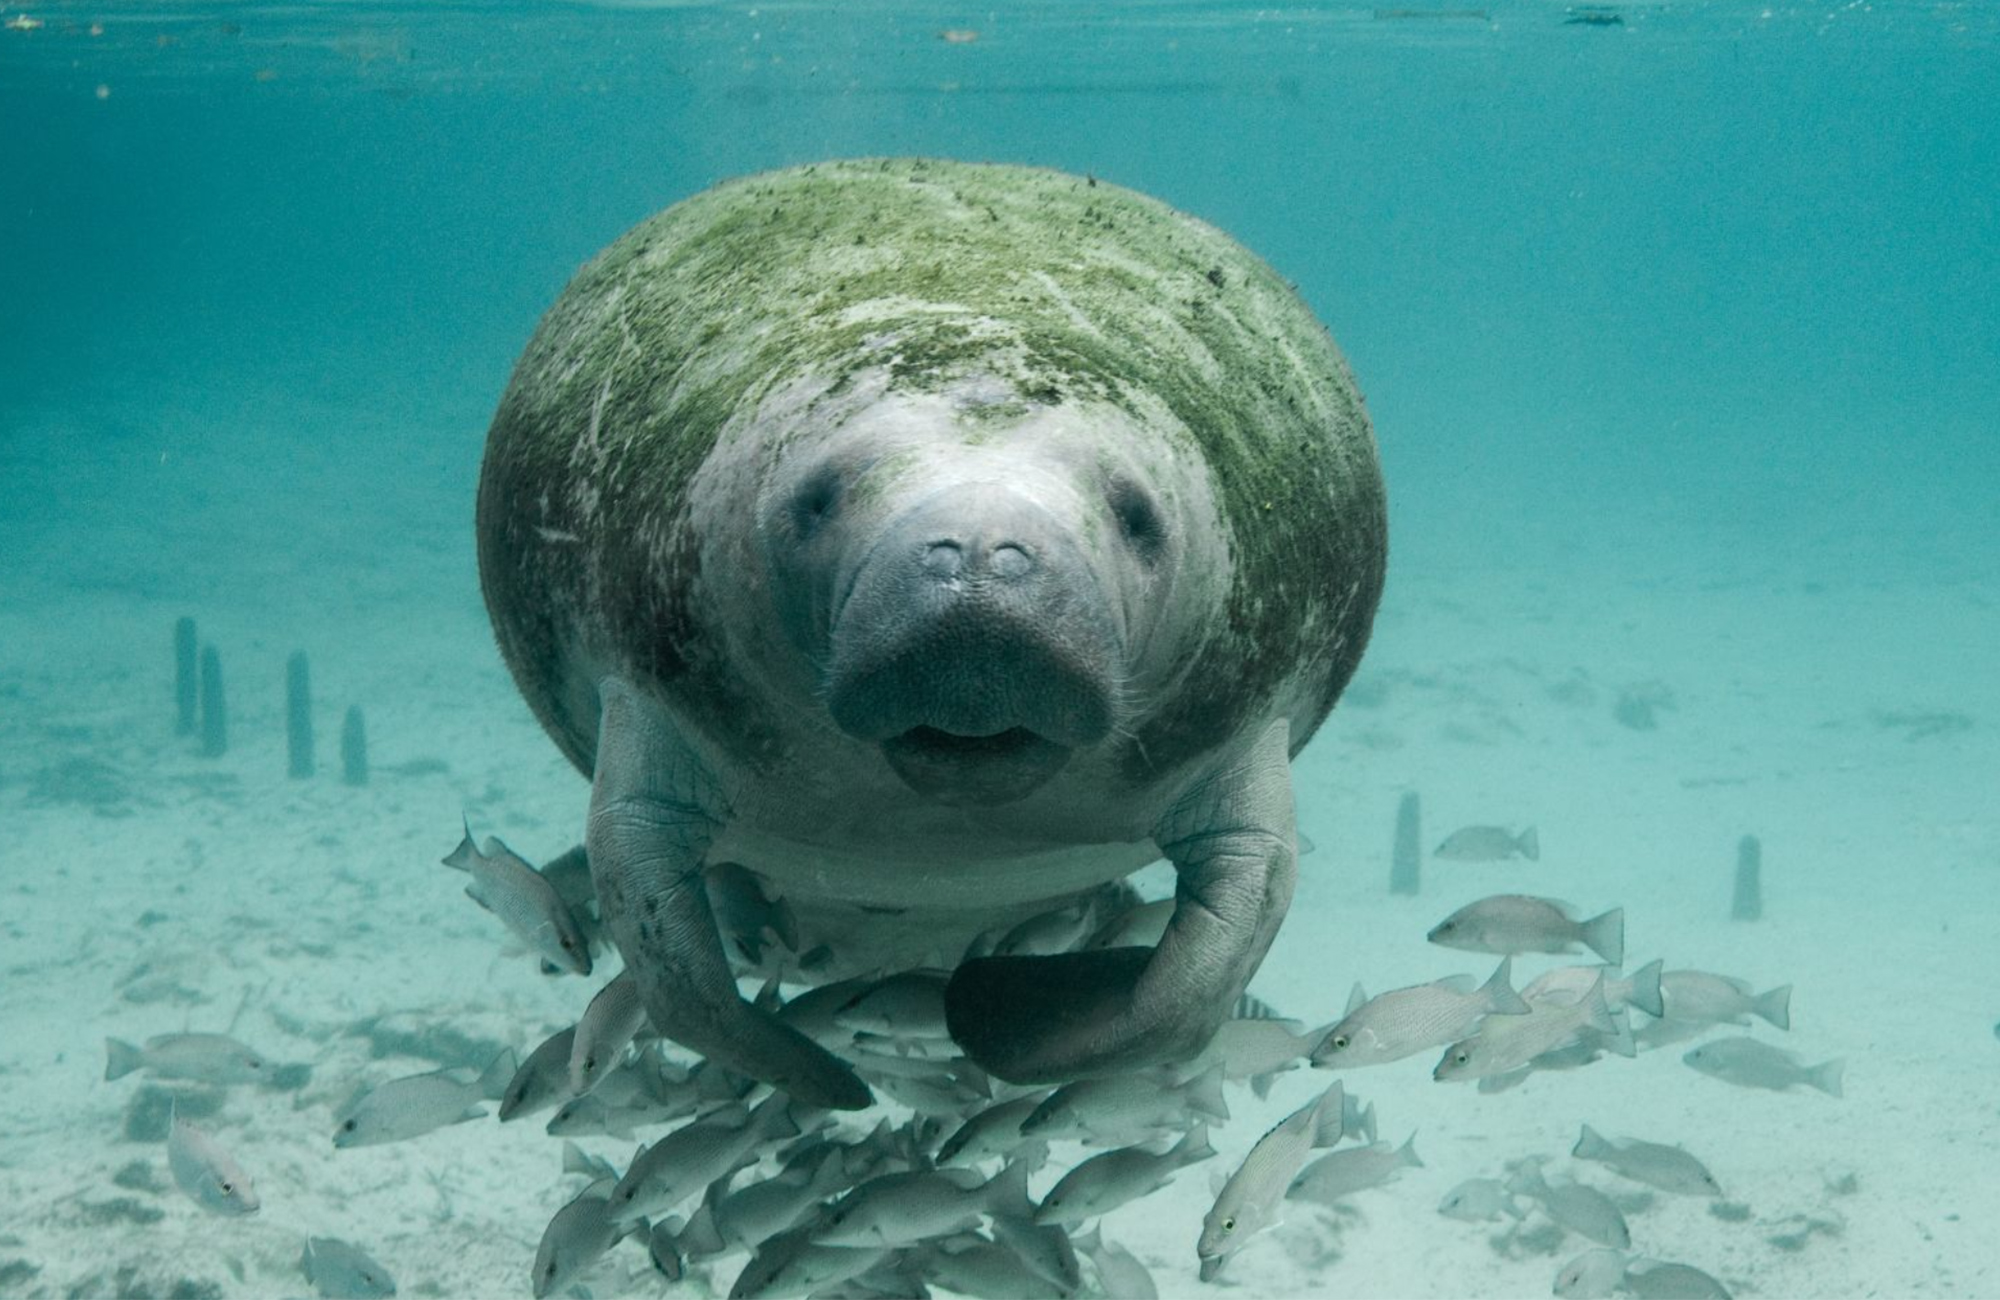 A manatee swims through blue water, surrounded by a school of fish